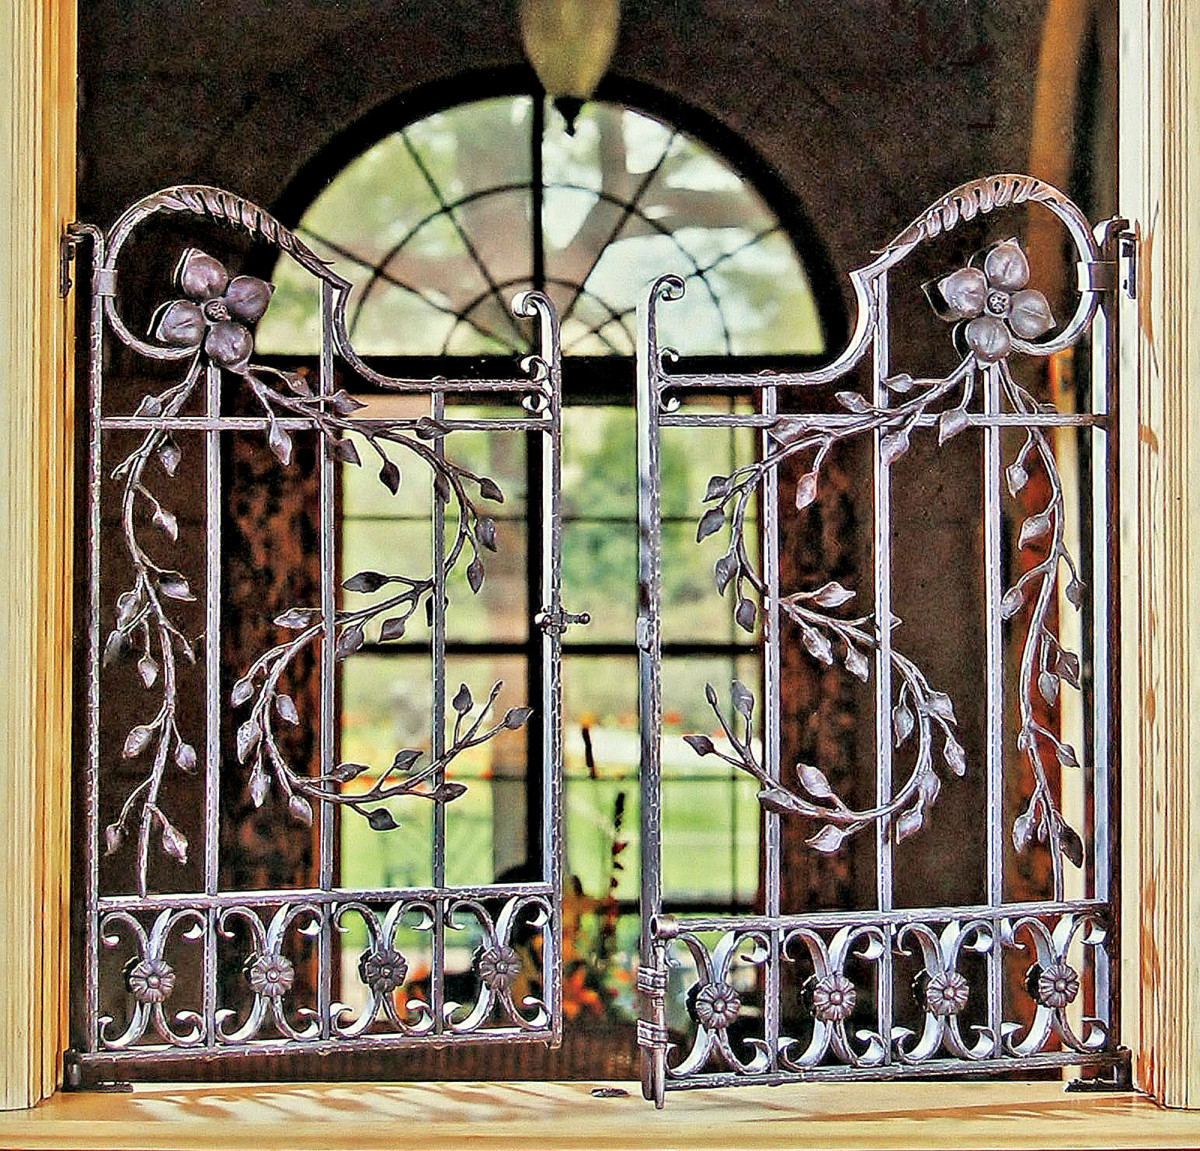 A blacksmith provided guidelines for specifying architectural ironwork.